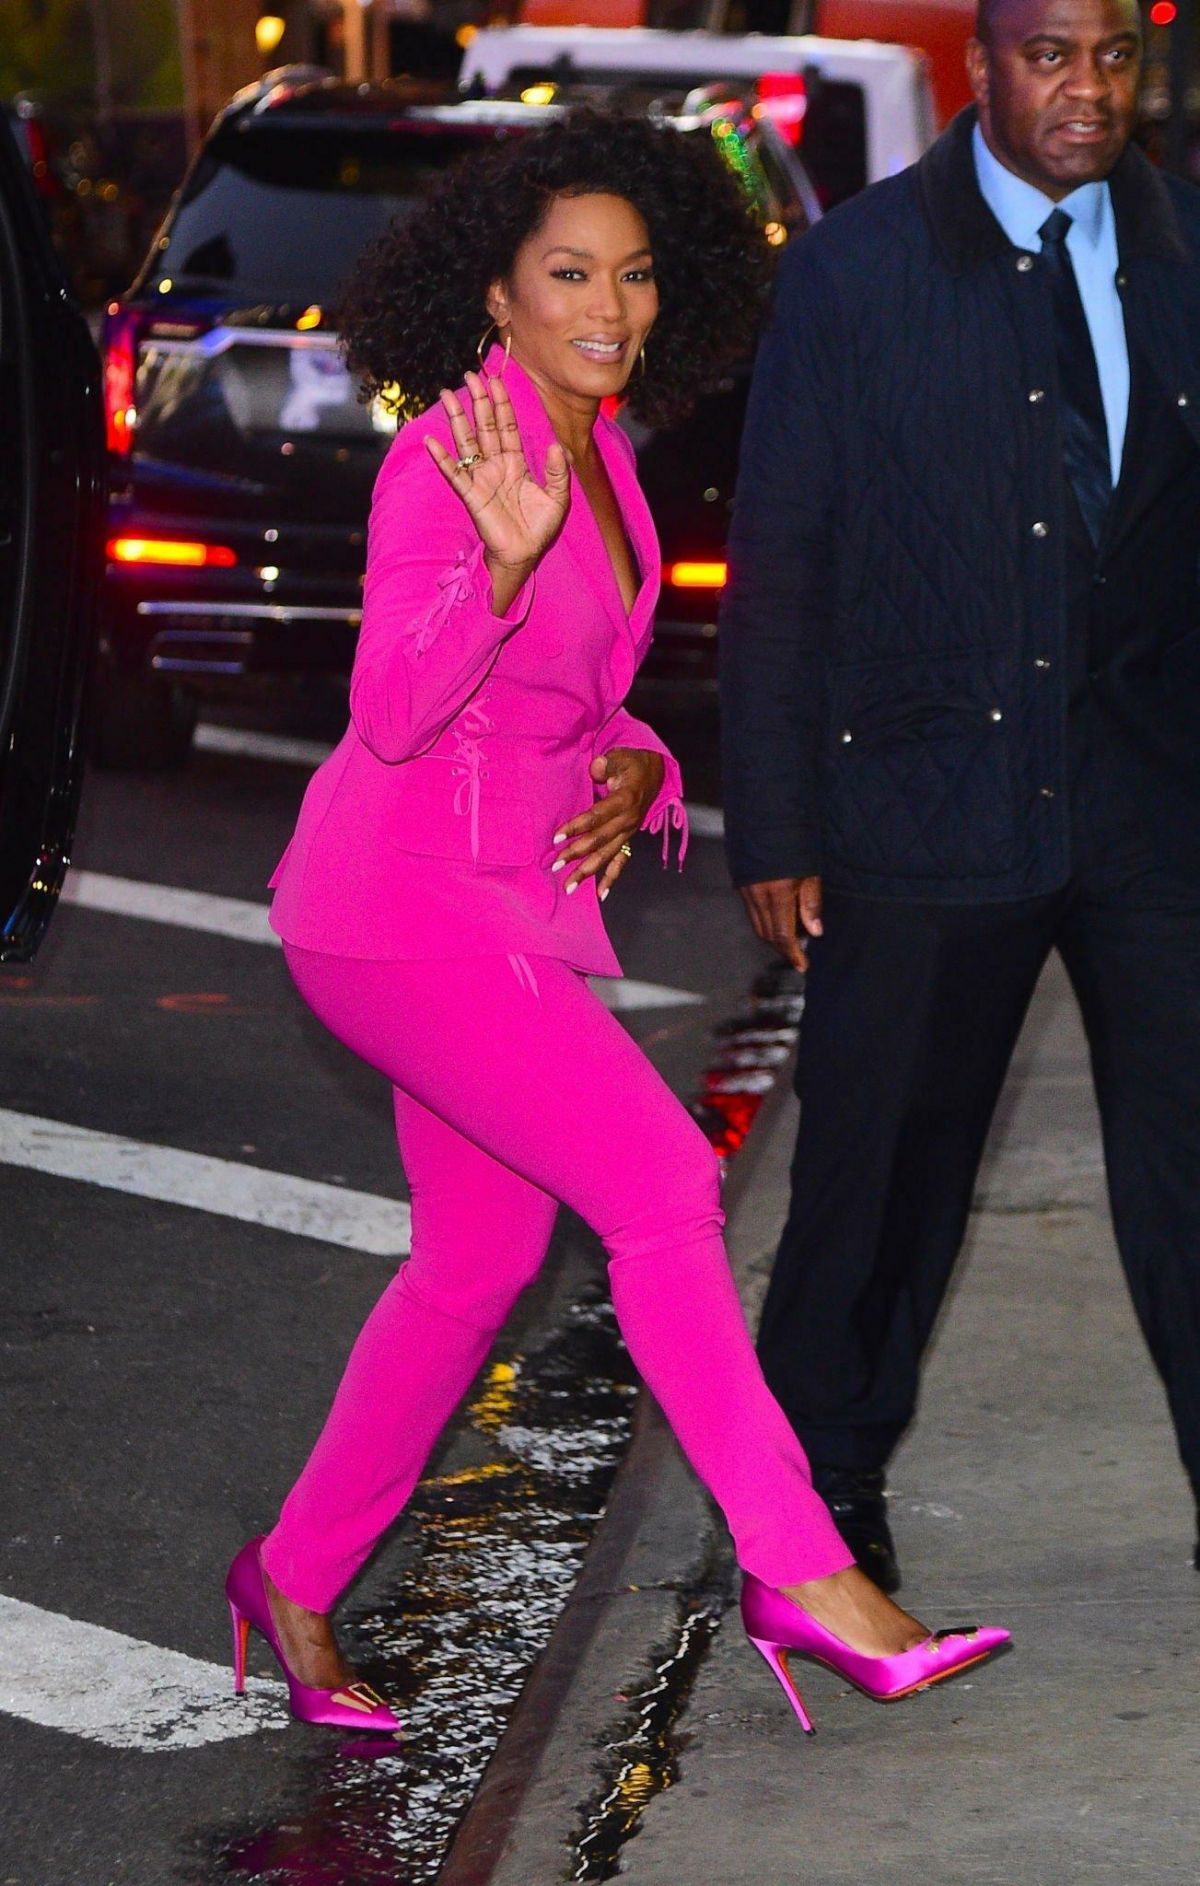 Angela Bassett seen in Pink Outfit at 2022 Glamour Women of the Year Awards in New York, Nov 2022